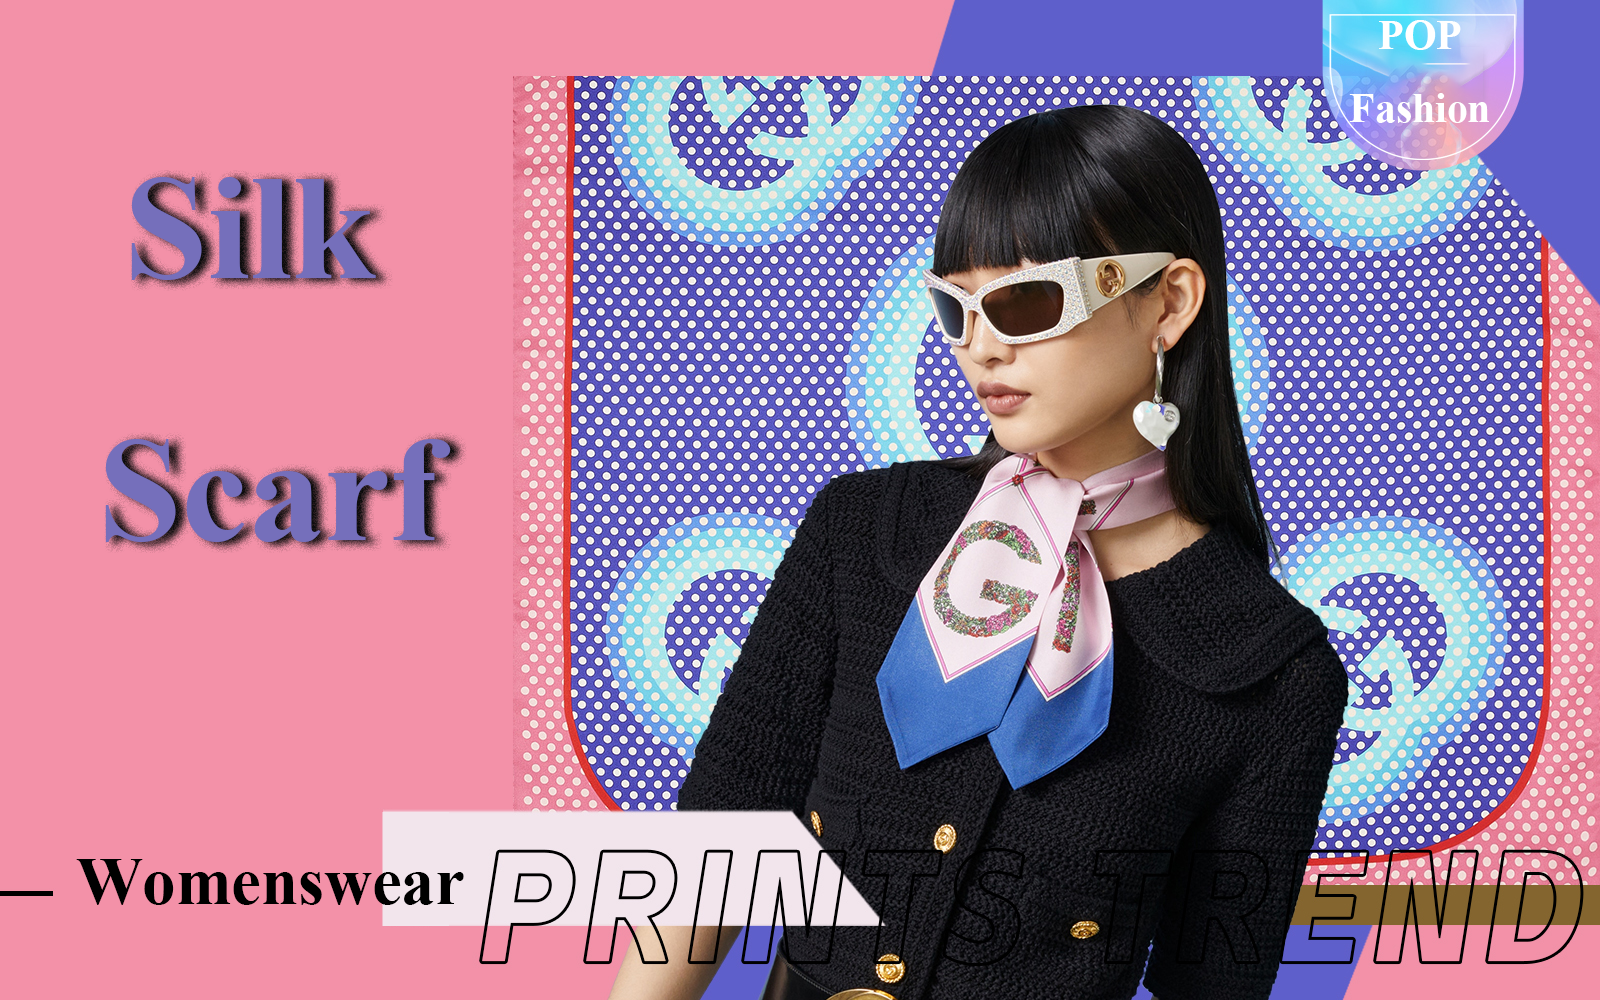 The Pattern Trend for Women's Silk Scarf